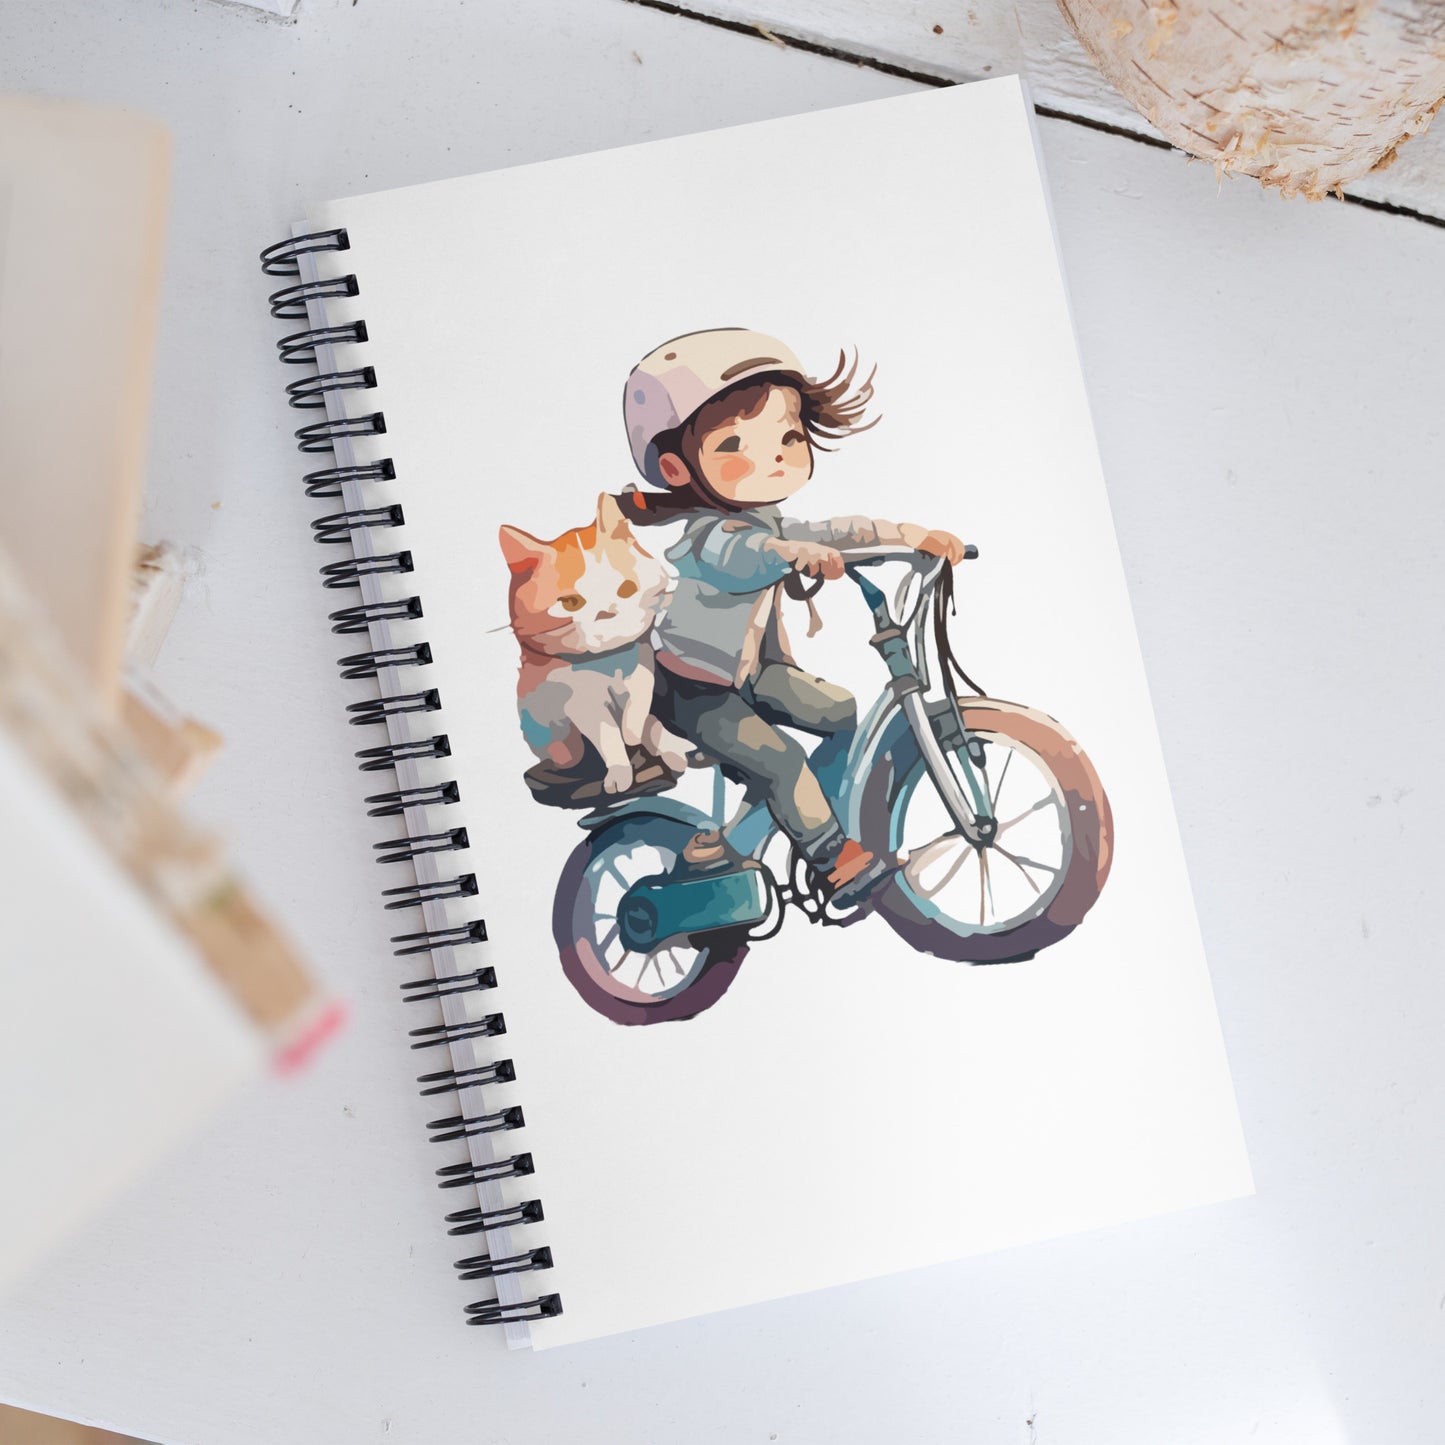 The Girl and her Cat Spiral notebook